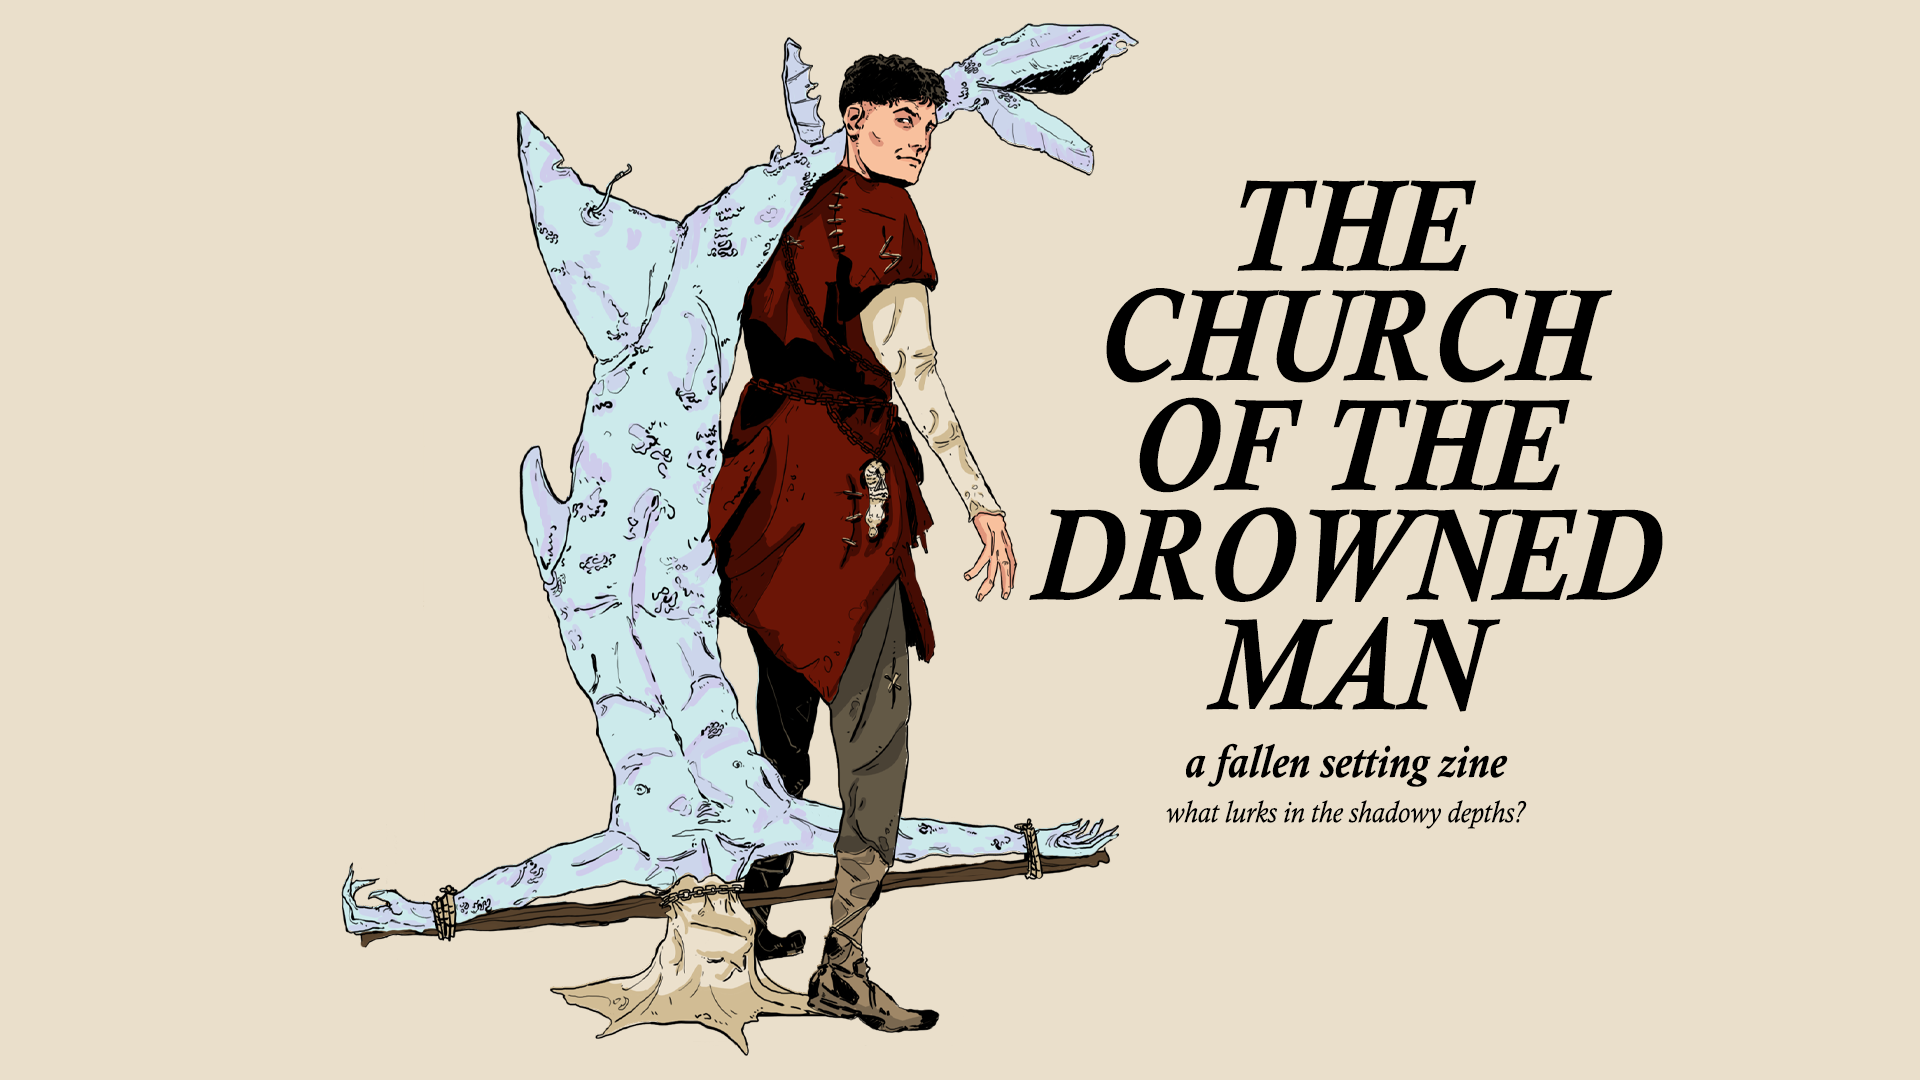 The Church of the Drowned Man